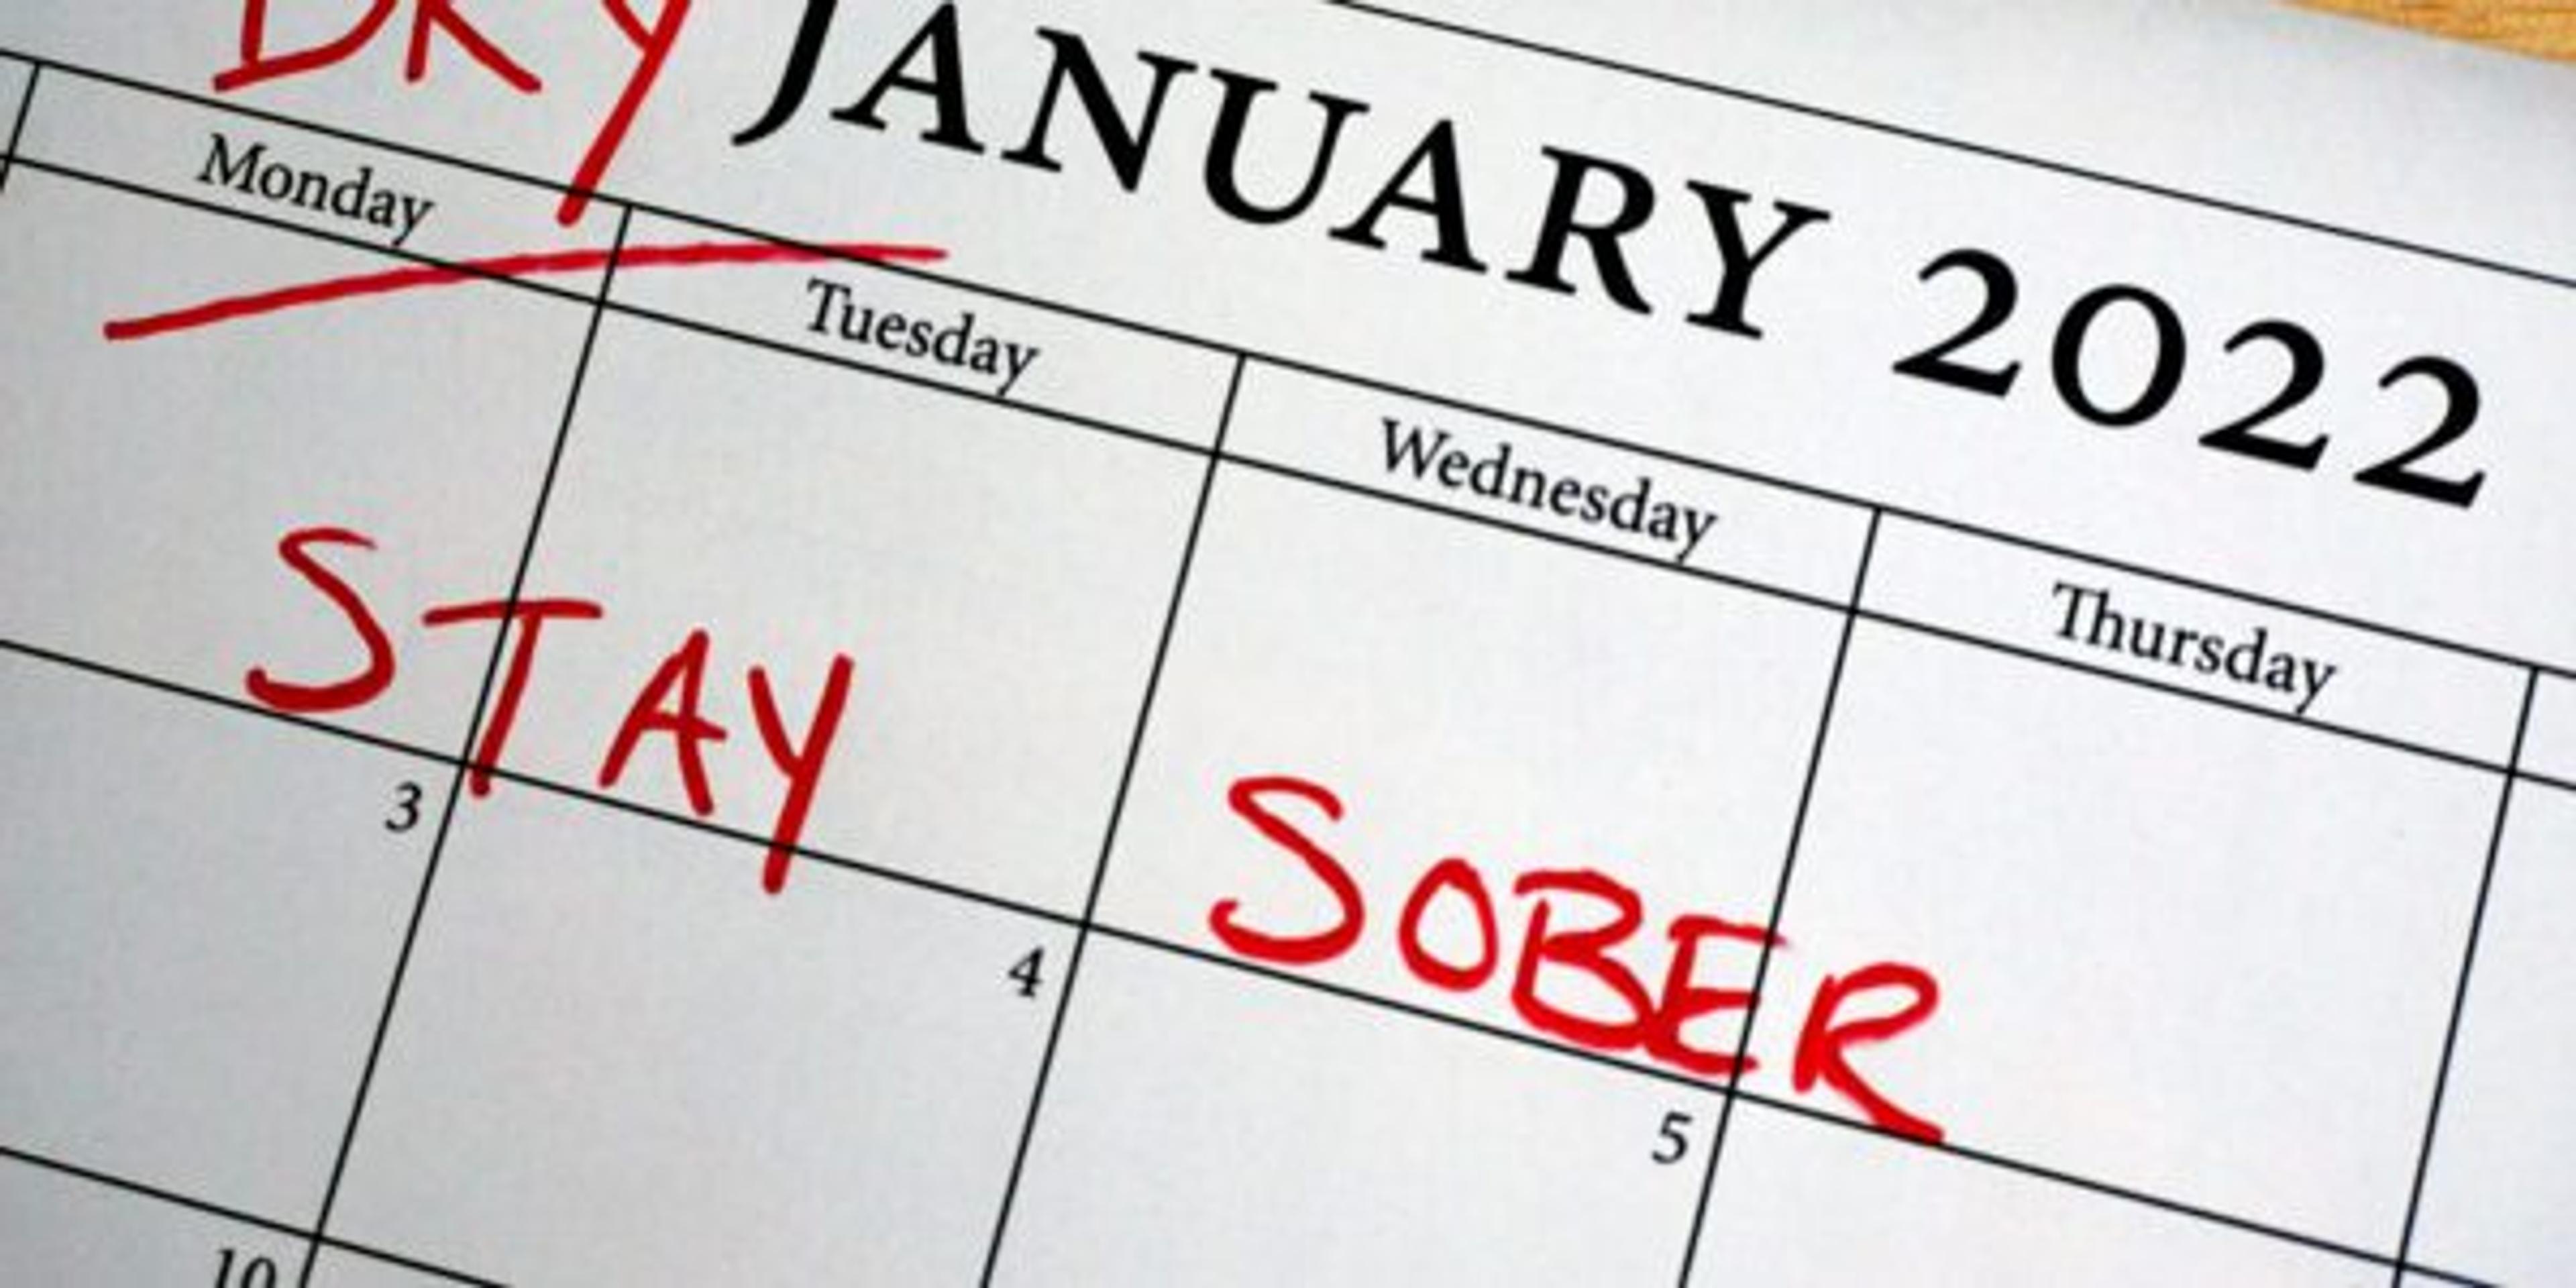 Reminder on a calendar for January that it is Dry January, an alcohol-free month of sobriety